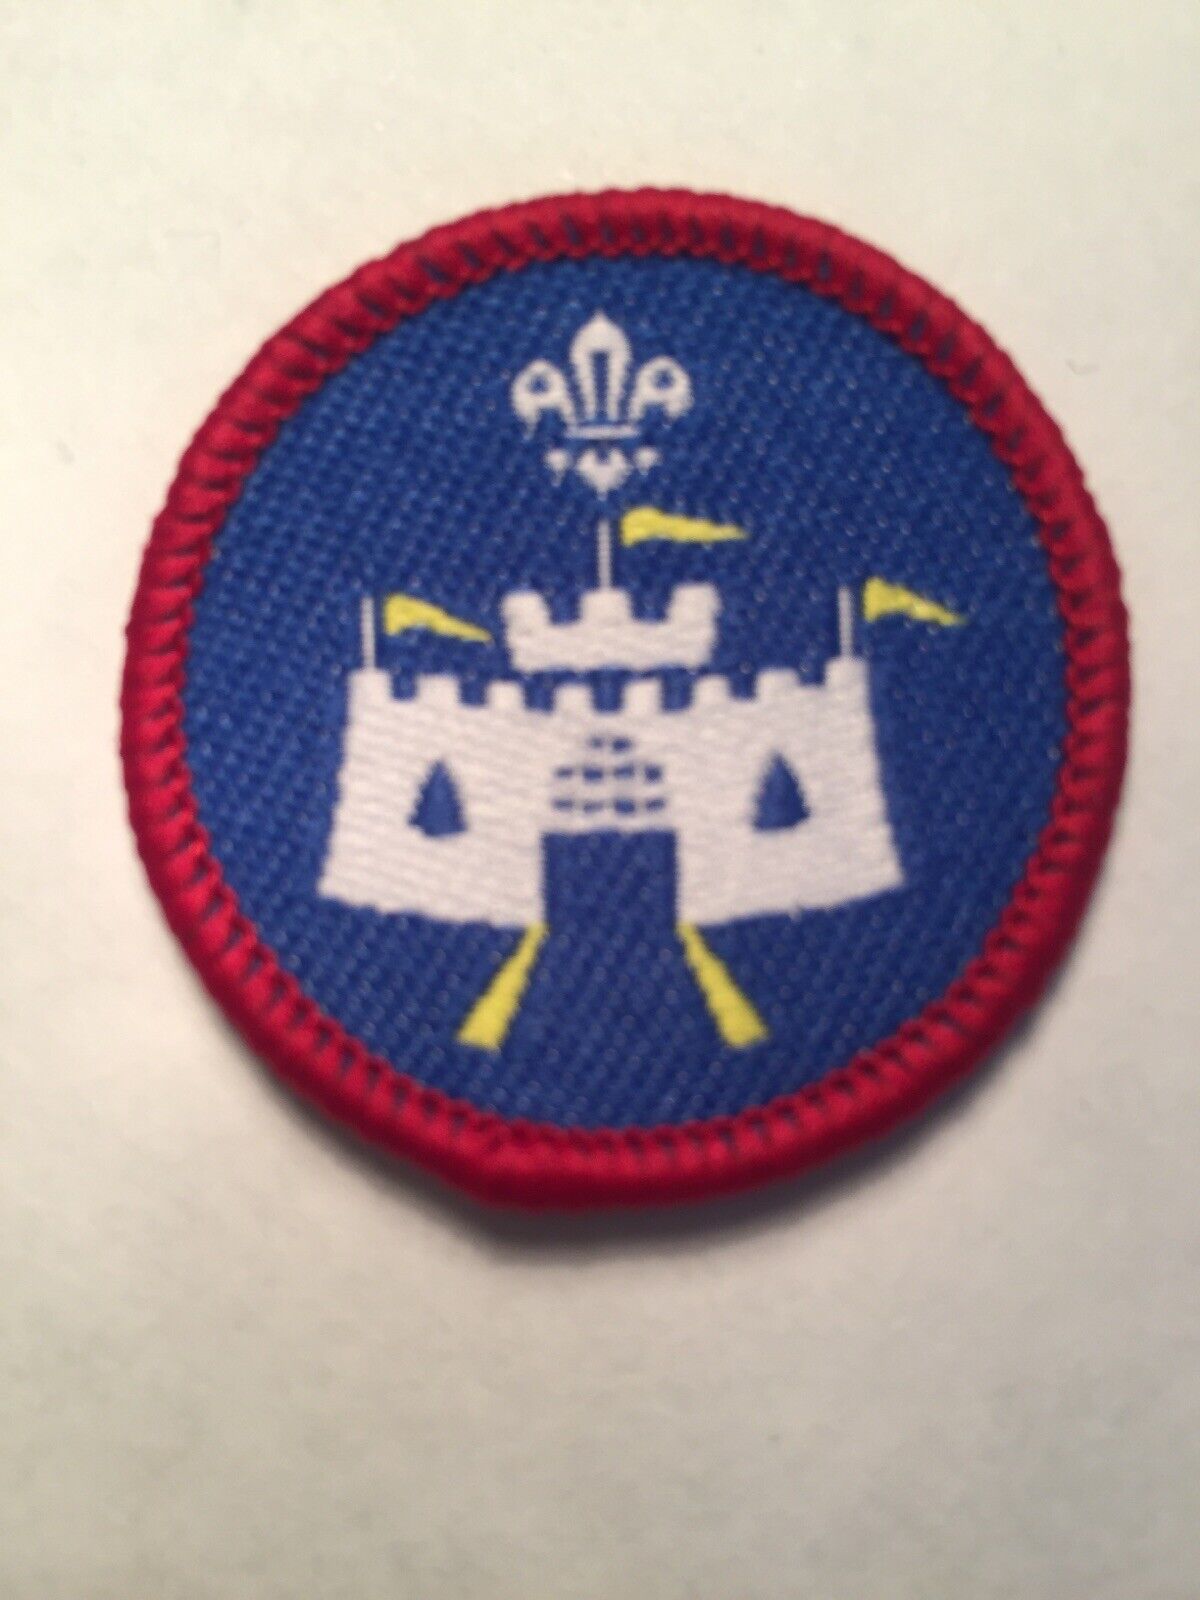 UK Scout Badge. Post 2002, Local Knowledge activity badge